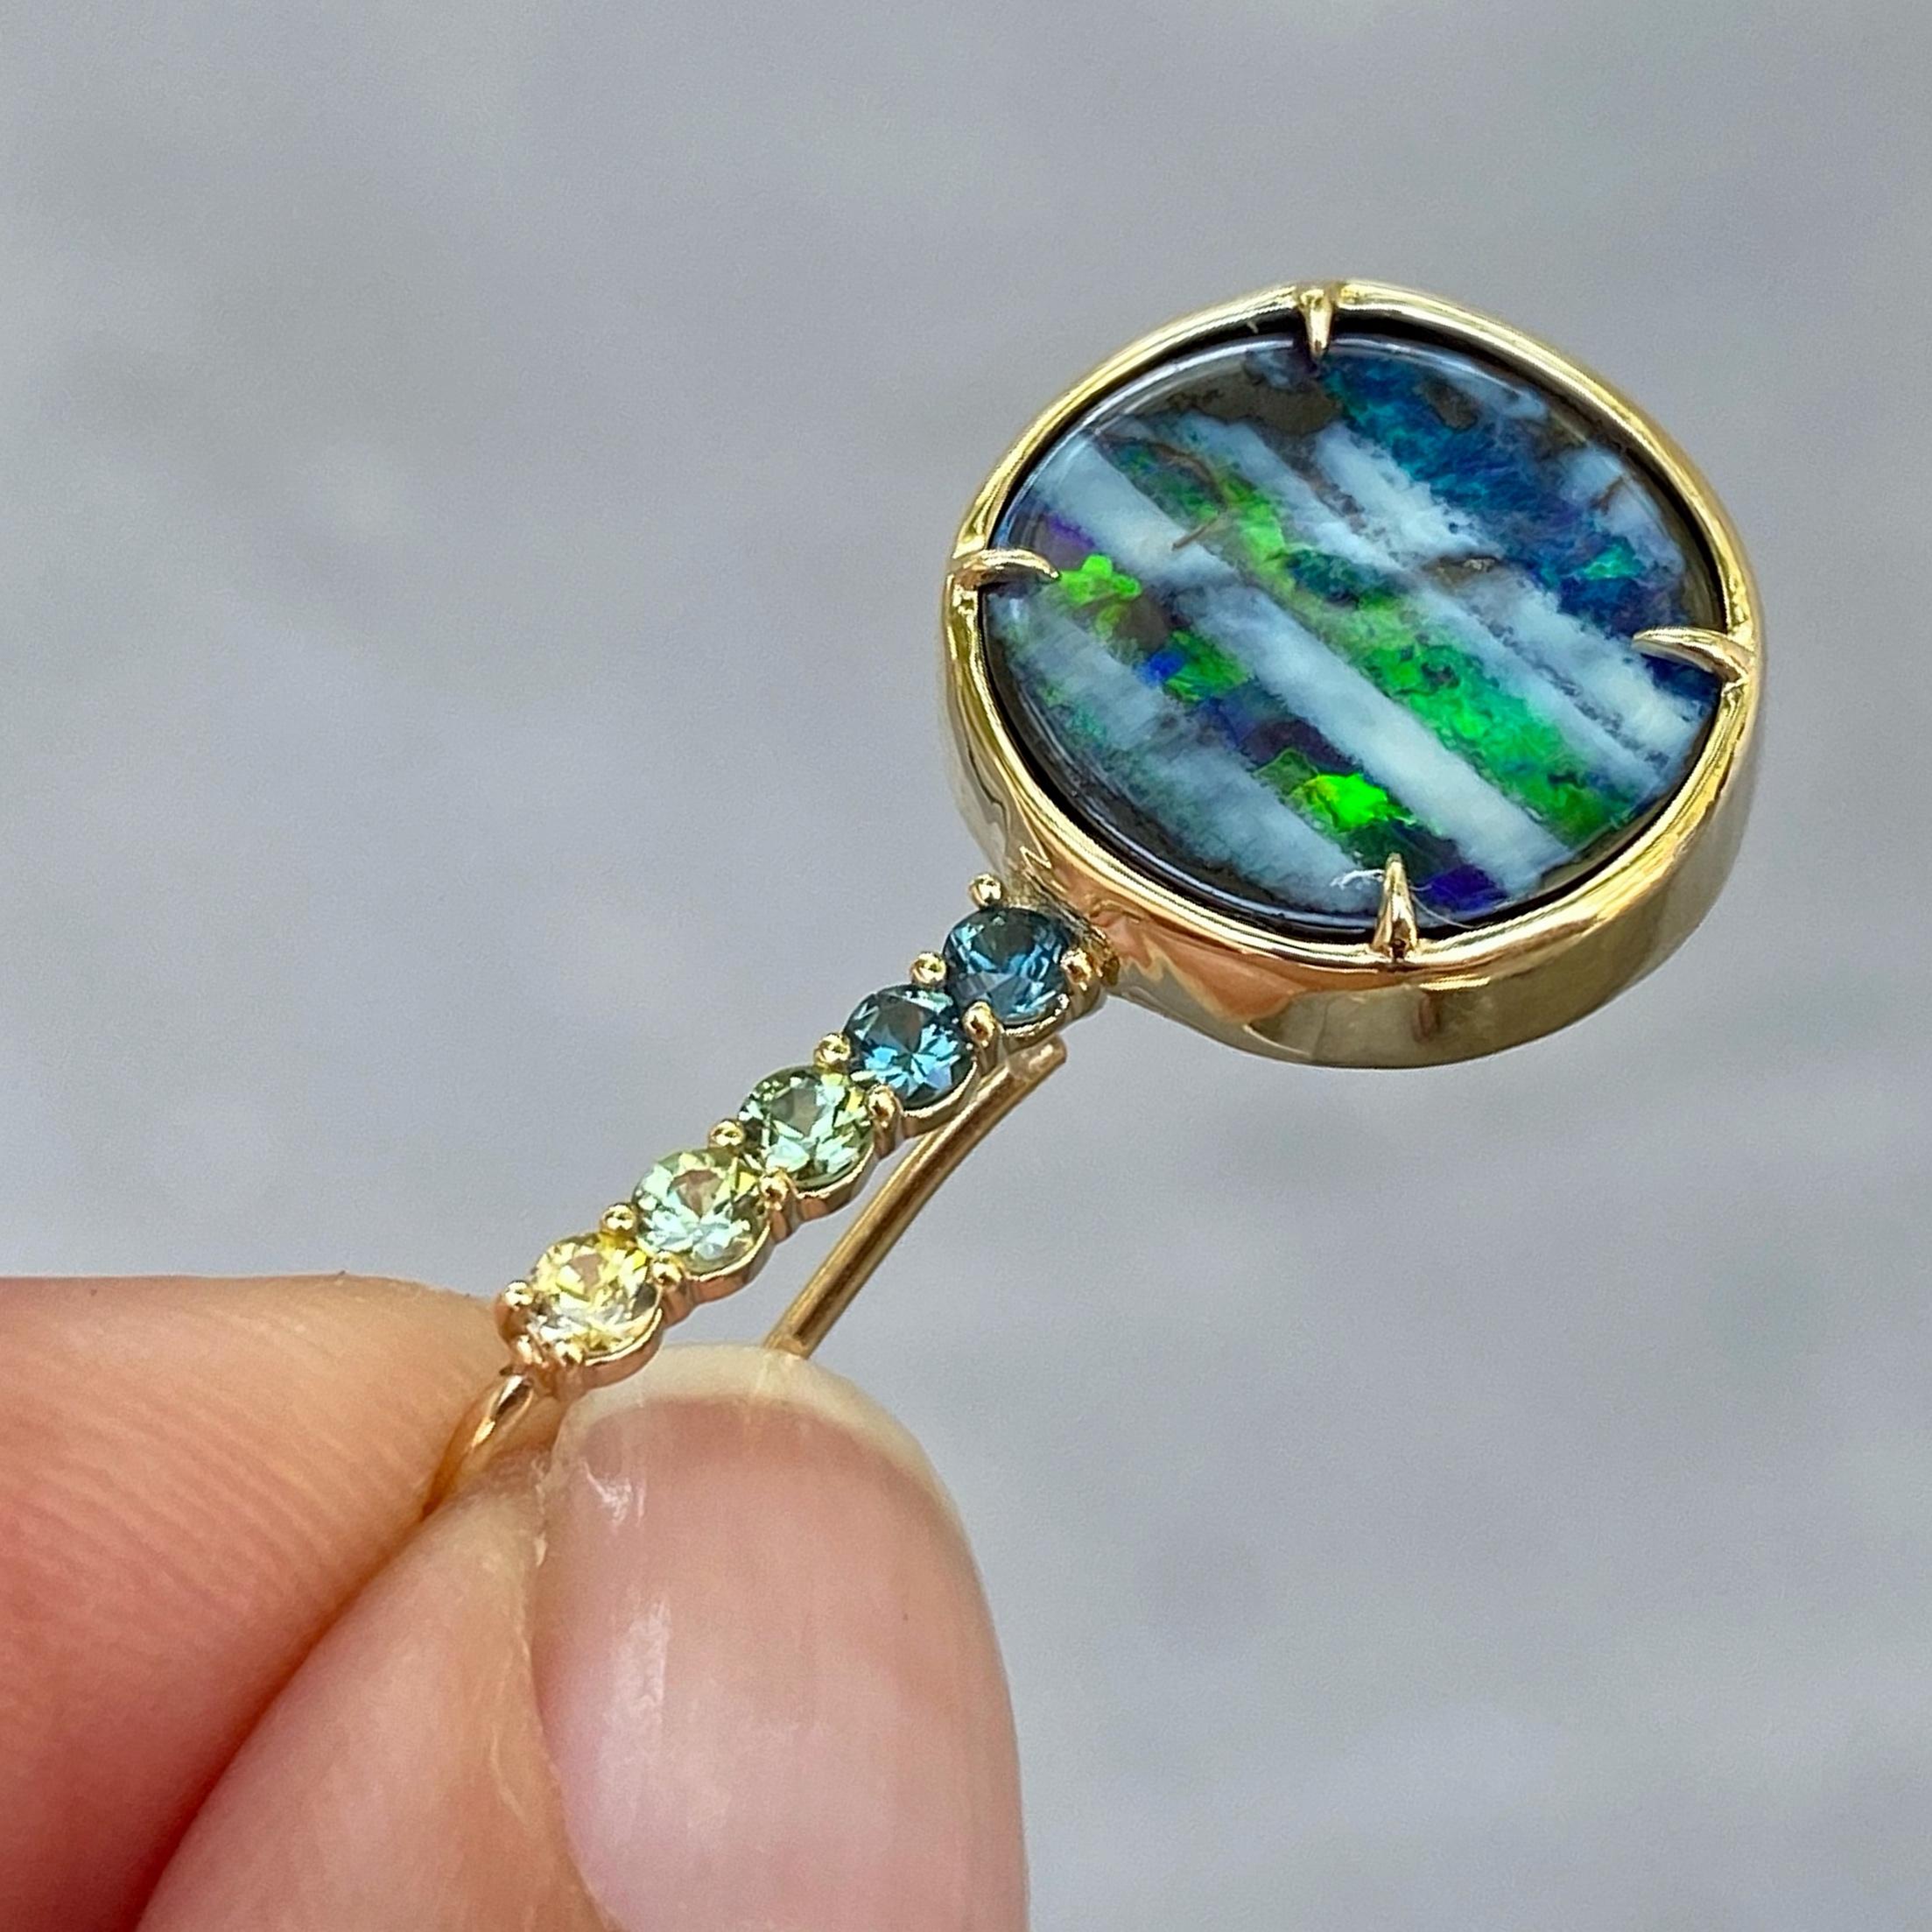 Brilliant Cut Galapagos Green Sapphire Opal Drop Earrings in 14k Gold by NIXIN Jewelry For Sale